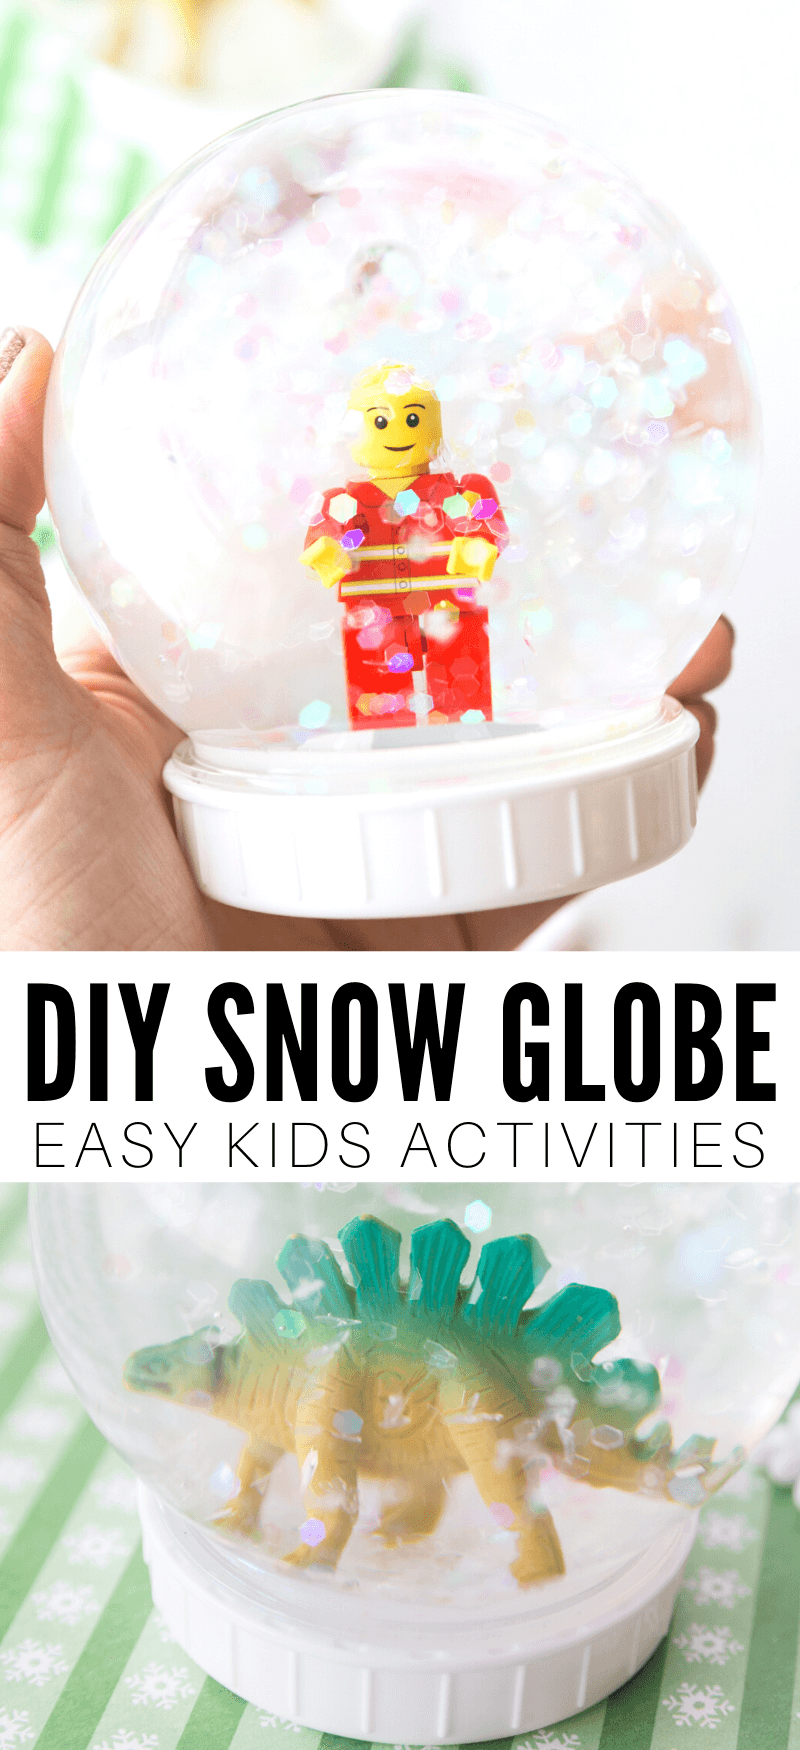 19 diy Projects for kids ideas